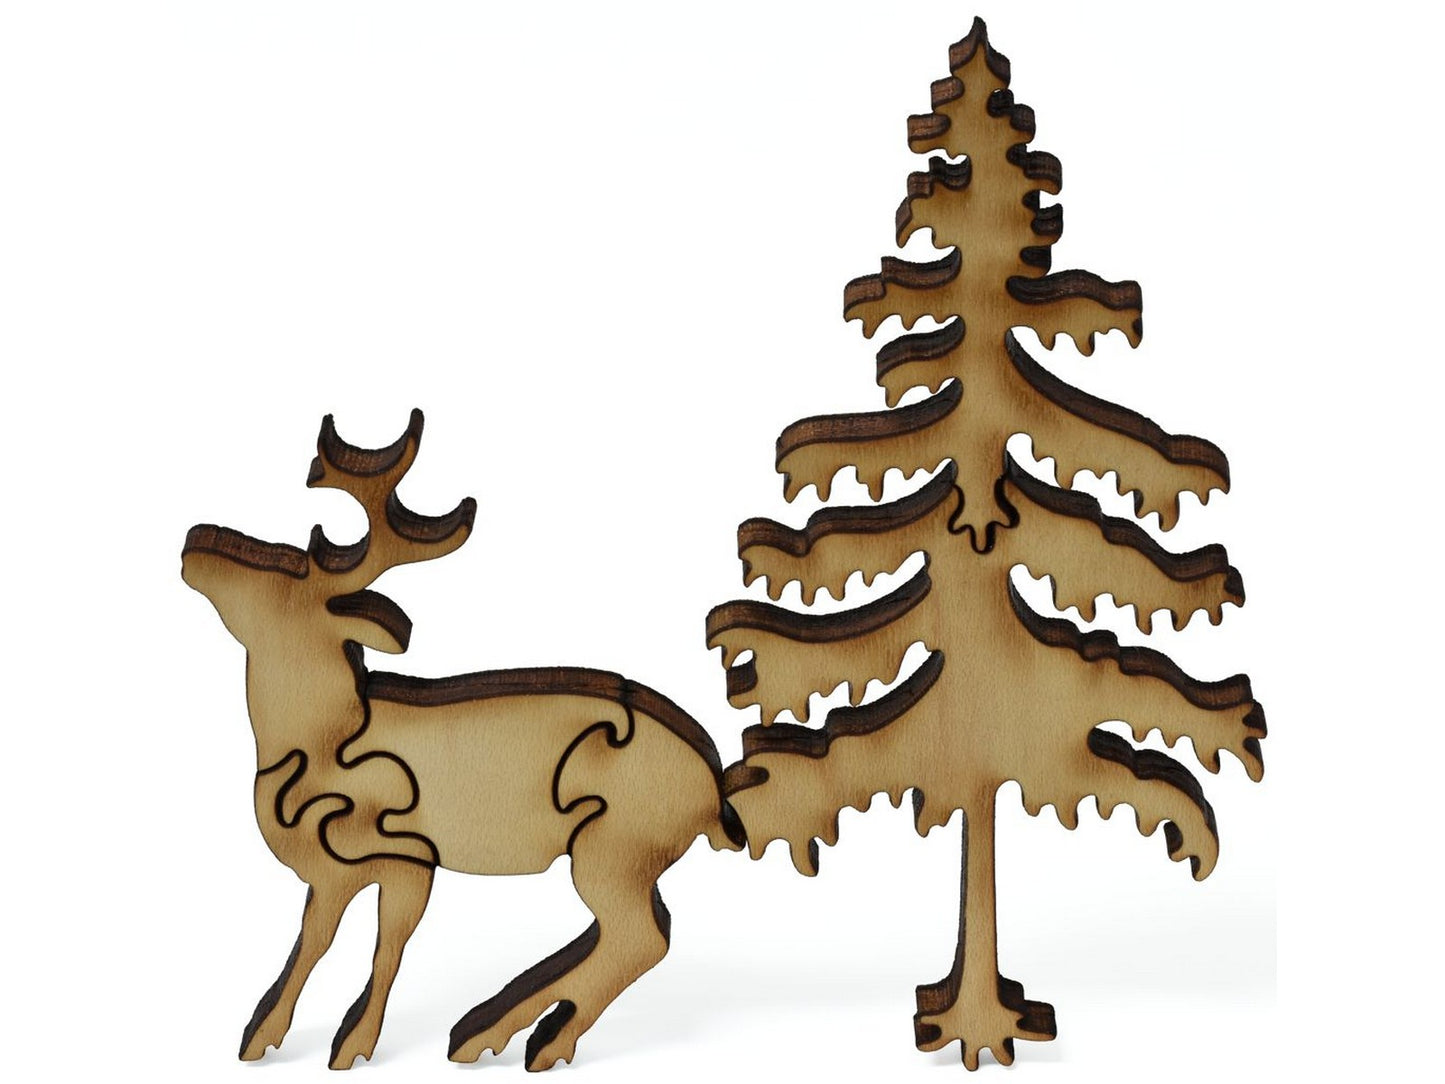 A closeup of pieces showing a deer and a tree.